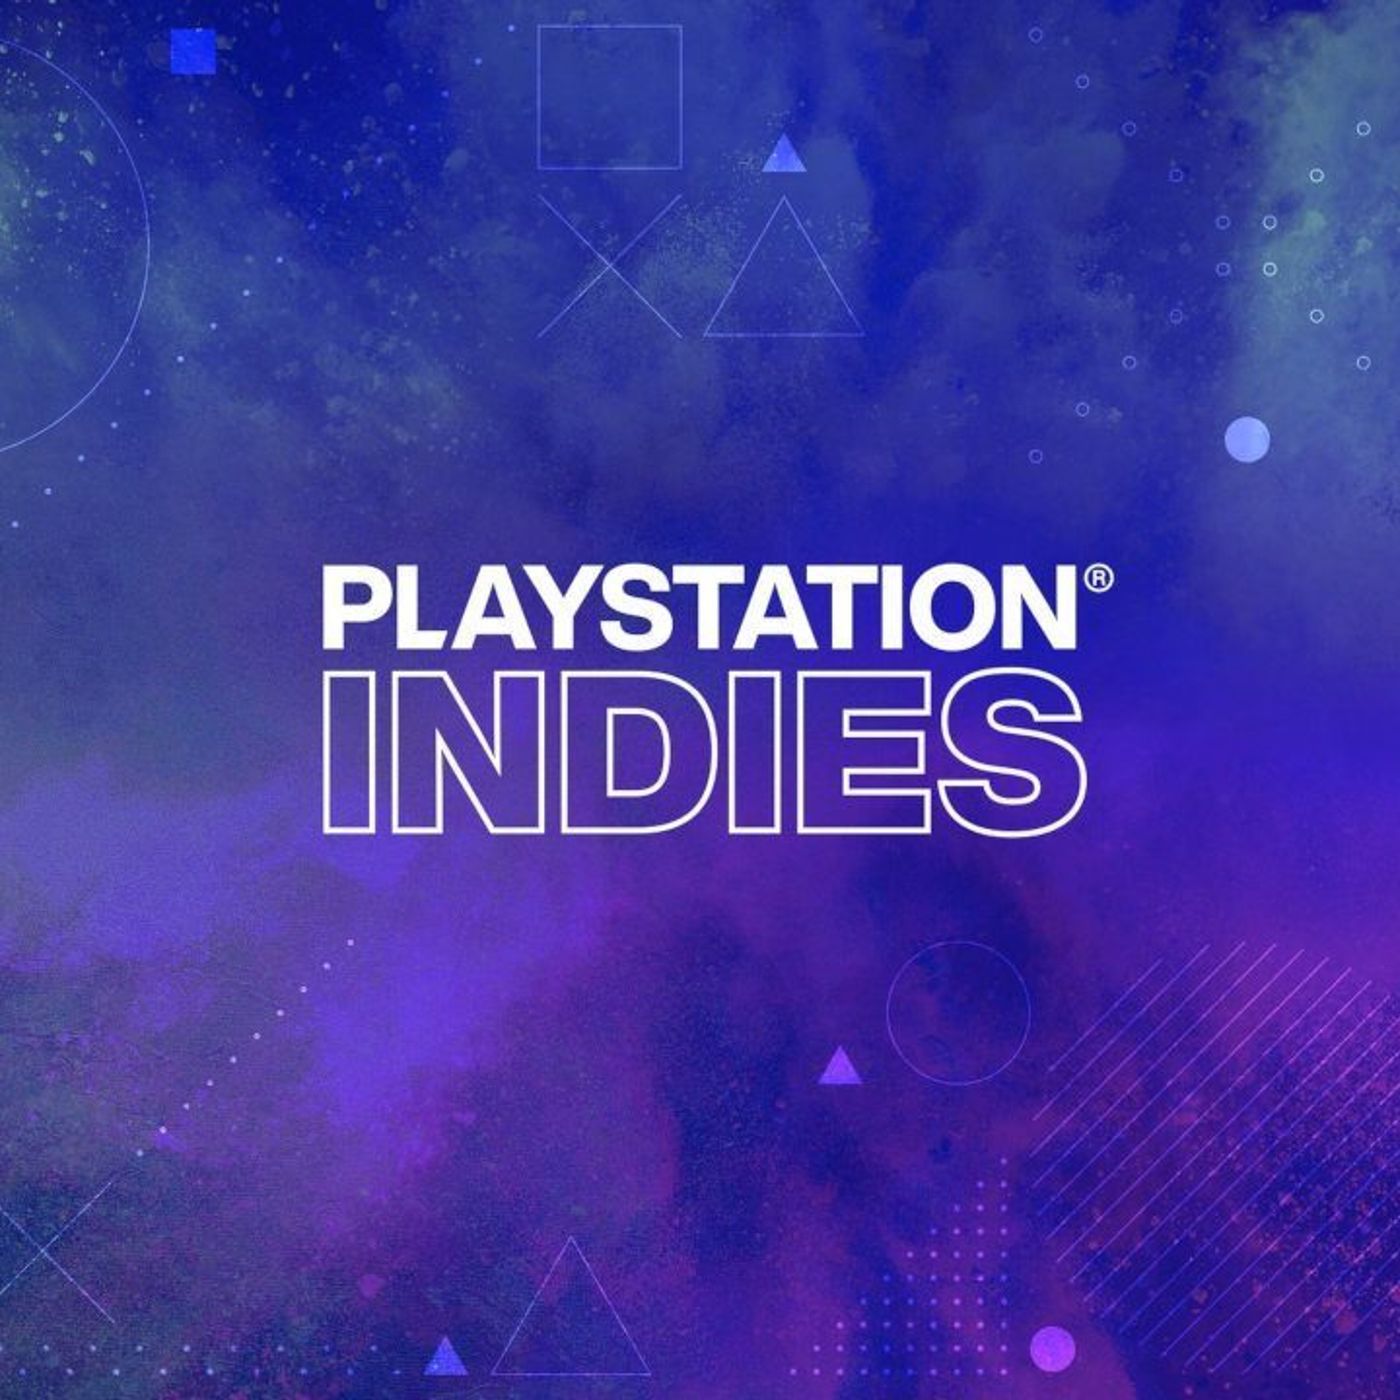 S16 Ep1145: PlayStation Indies, Halo Infinite and Call of Duty